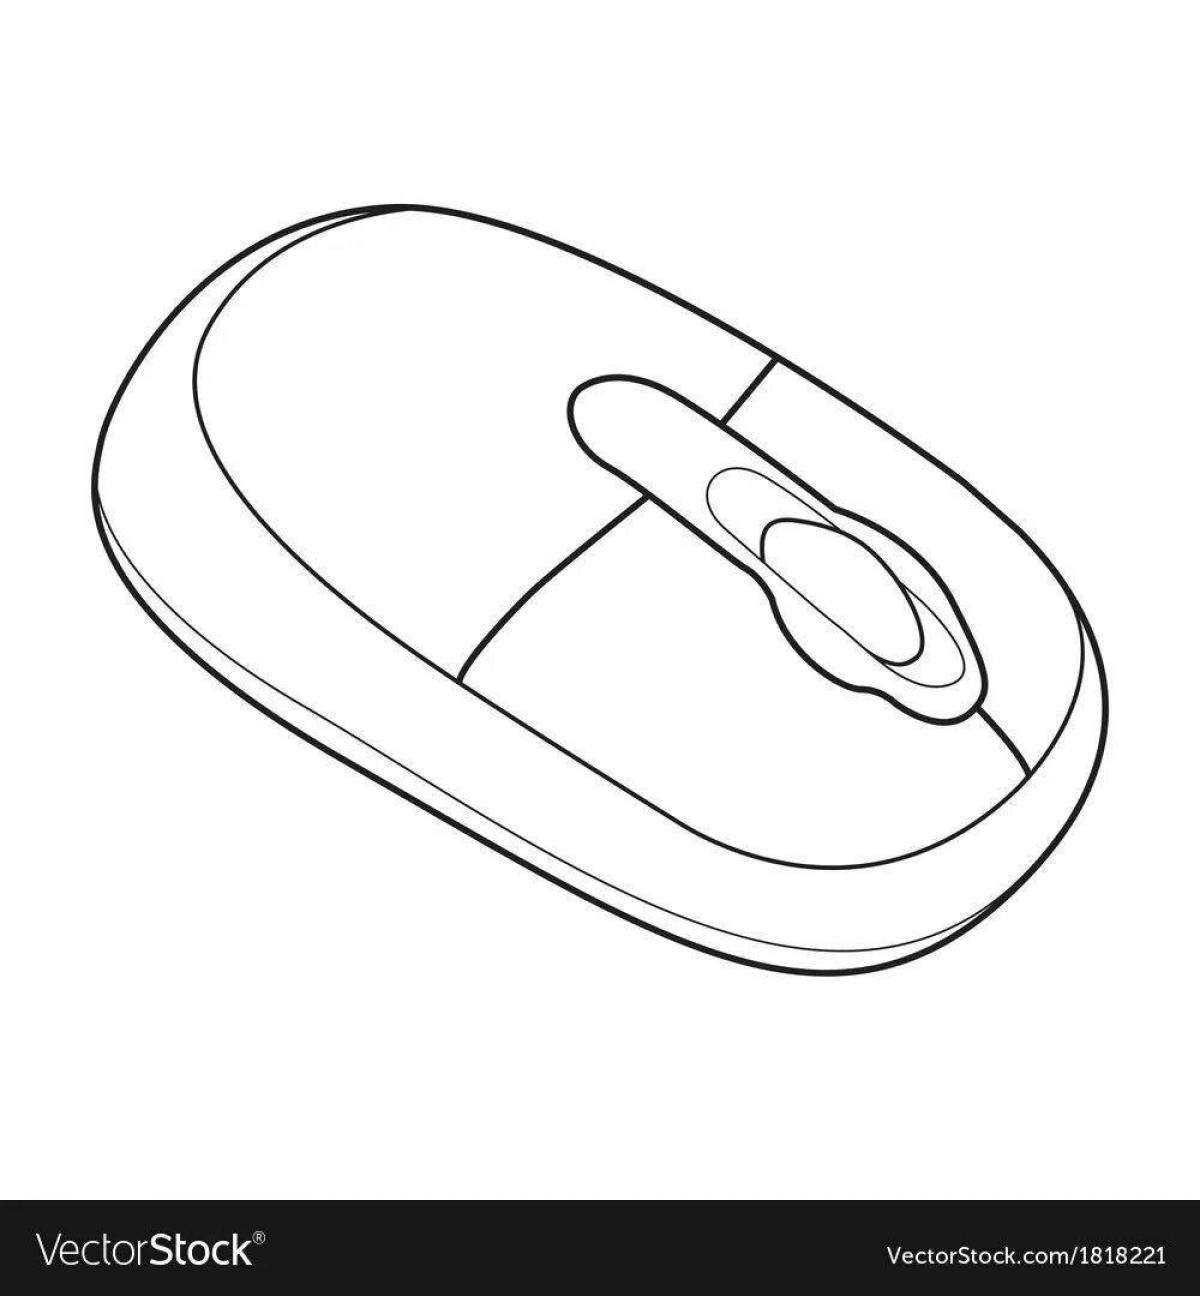 Adorable computer mouse coloring page